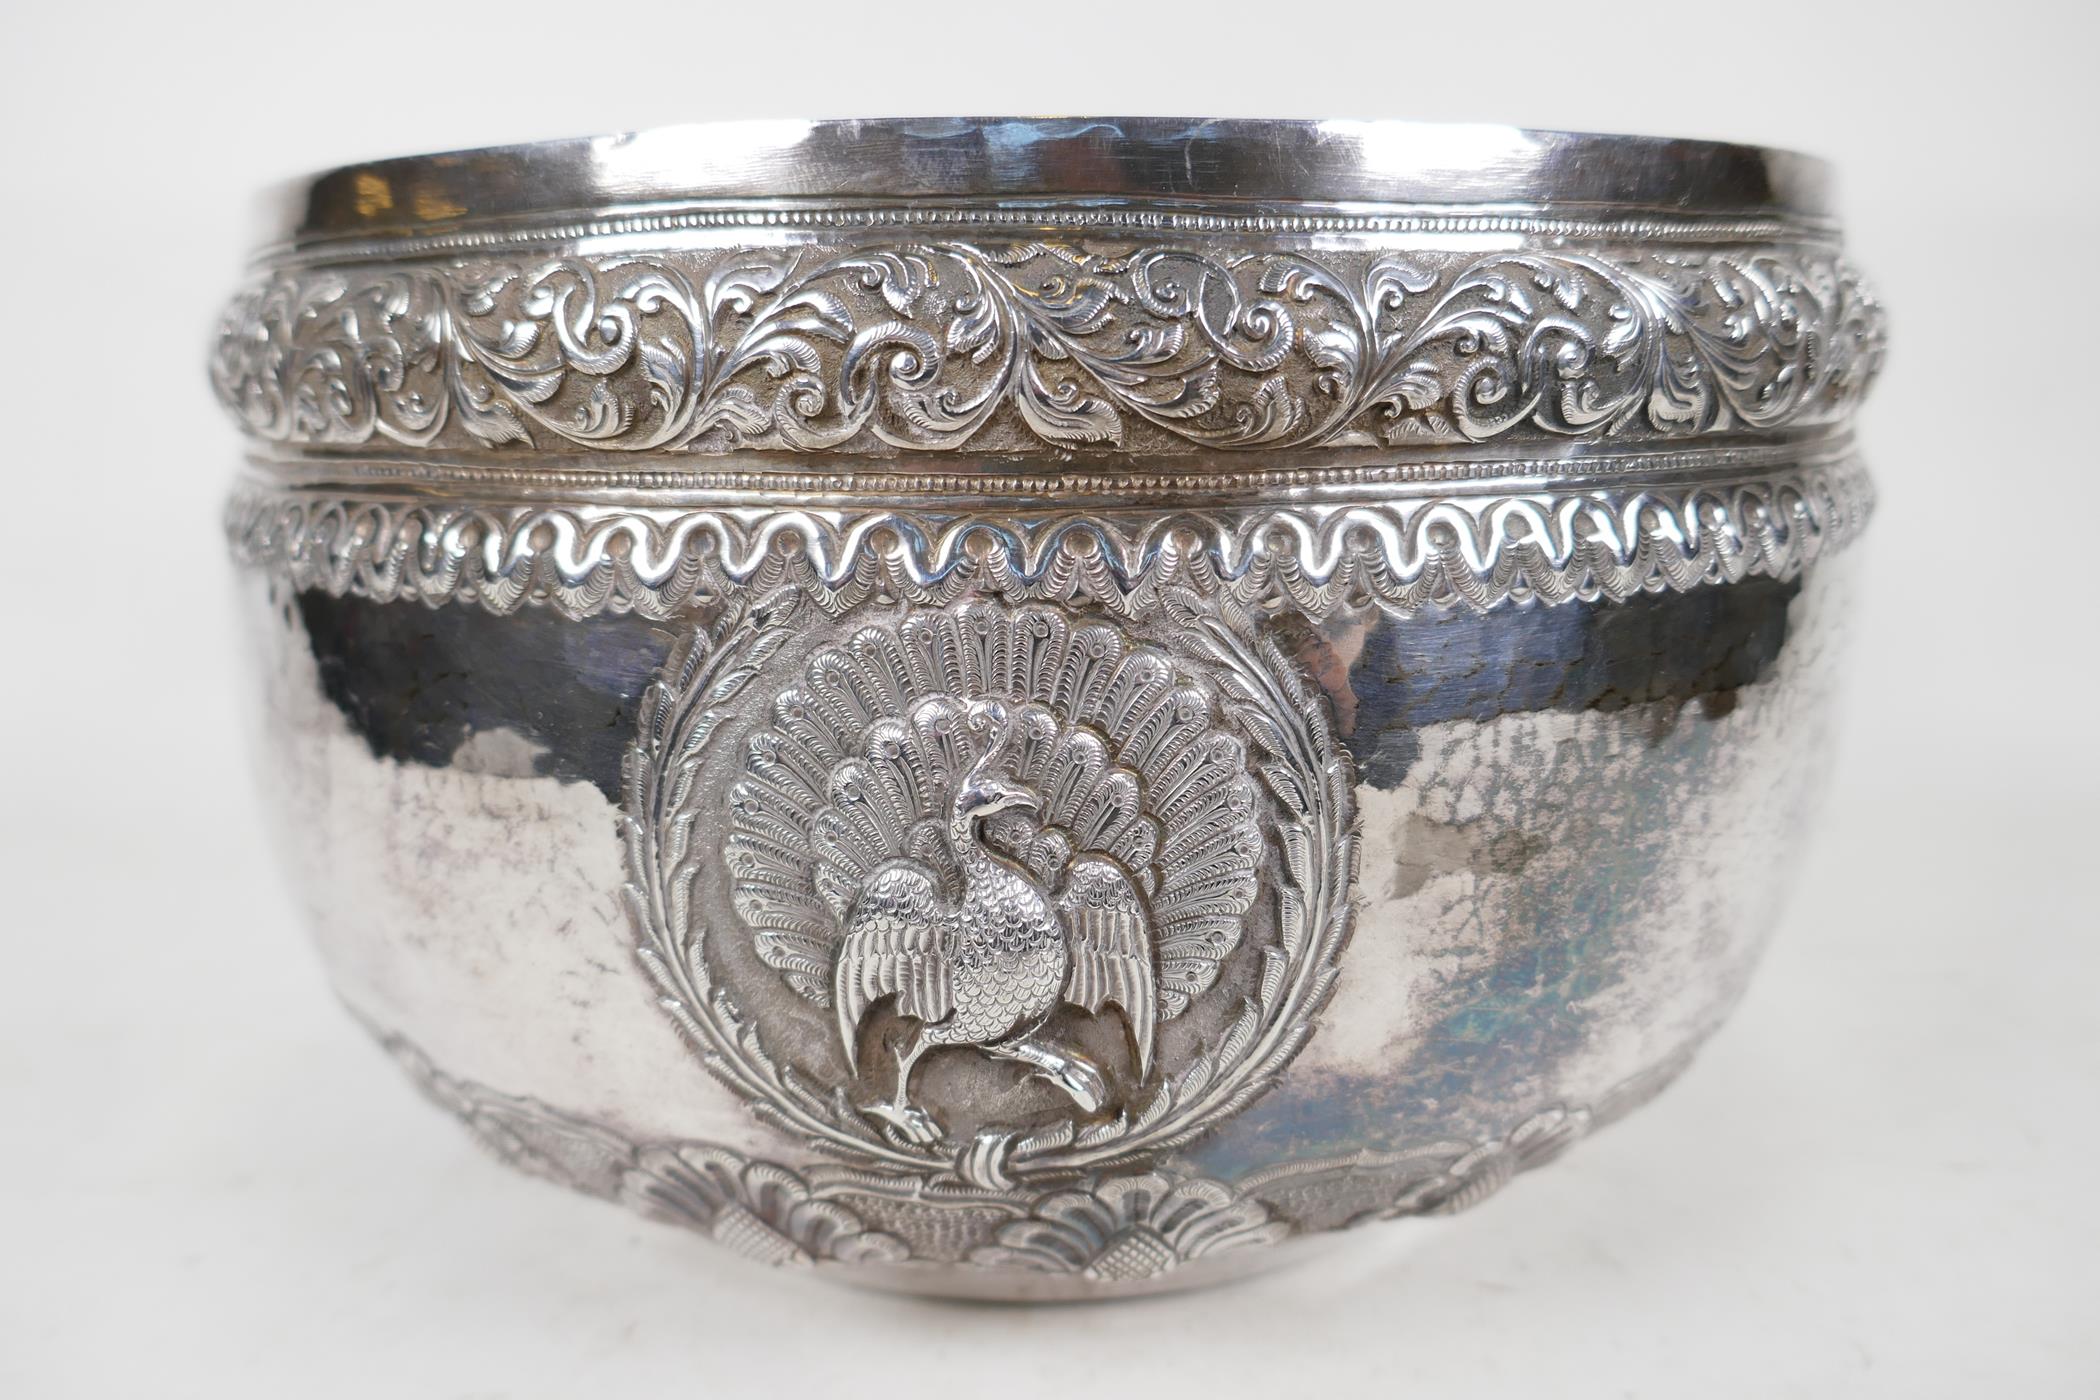 An antique Indian silver bowl, hammered silver with embossed scrolling decoration, a bas relief - Image 3 of 8